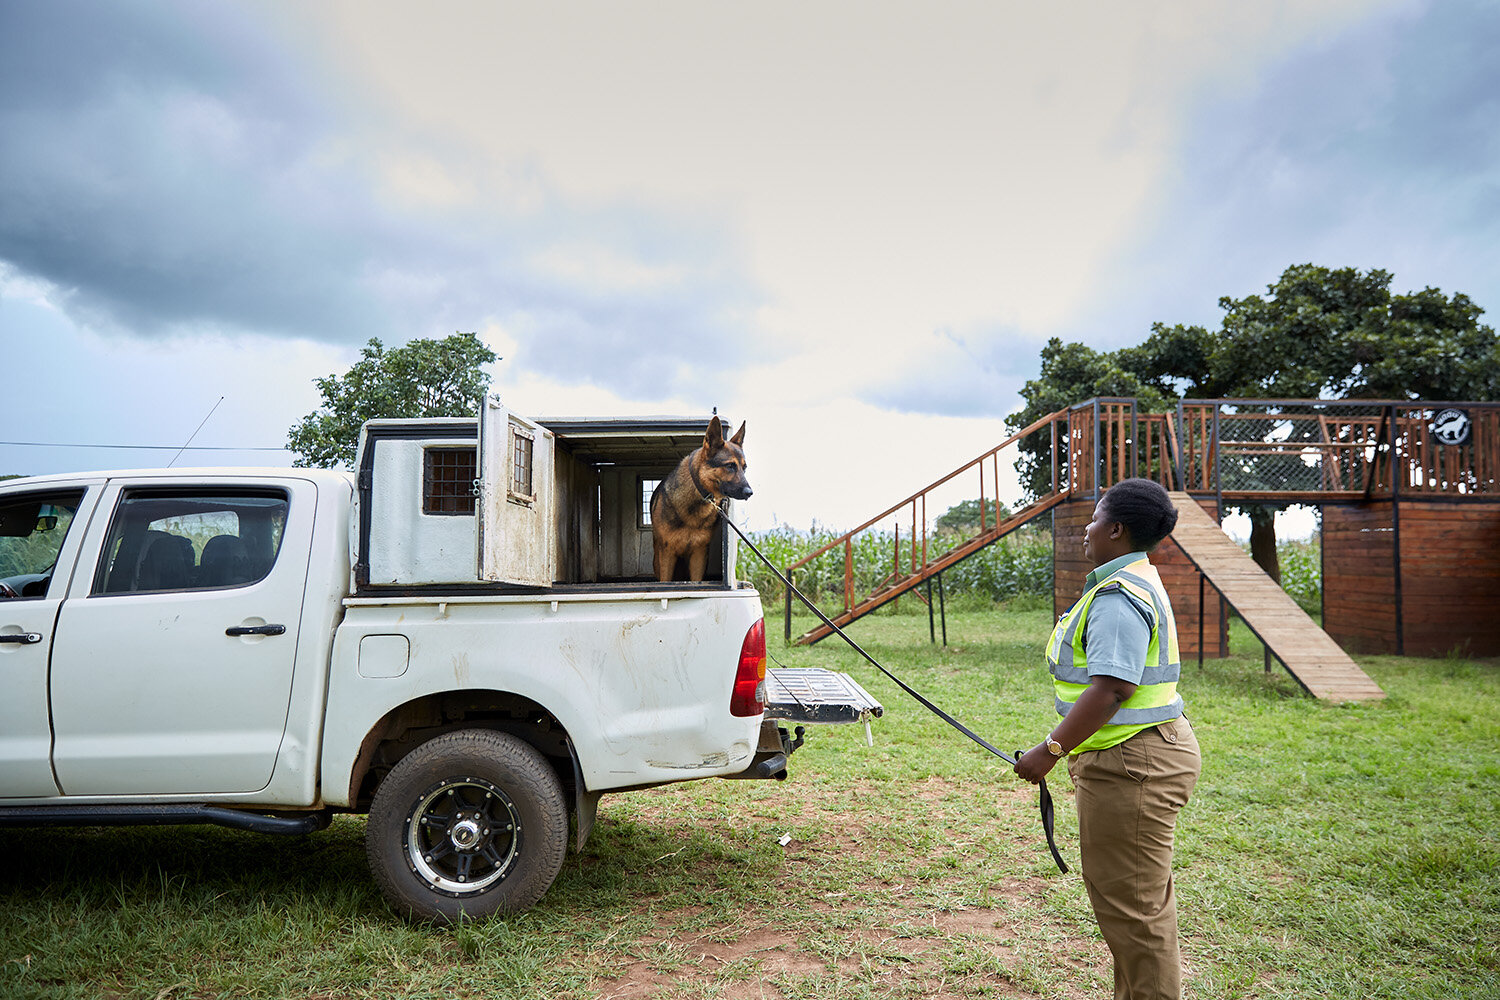  Back at base, Wildlife Detection Dog Unit handler Agnes waits for dog Max to exit the unit’s transport vehicle after their shift is over, Lilongwe, Malawi, 2020. 